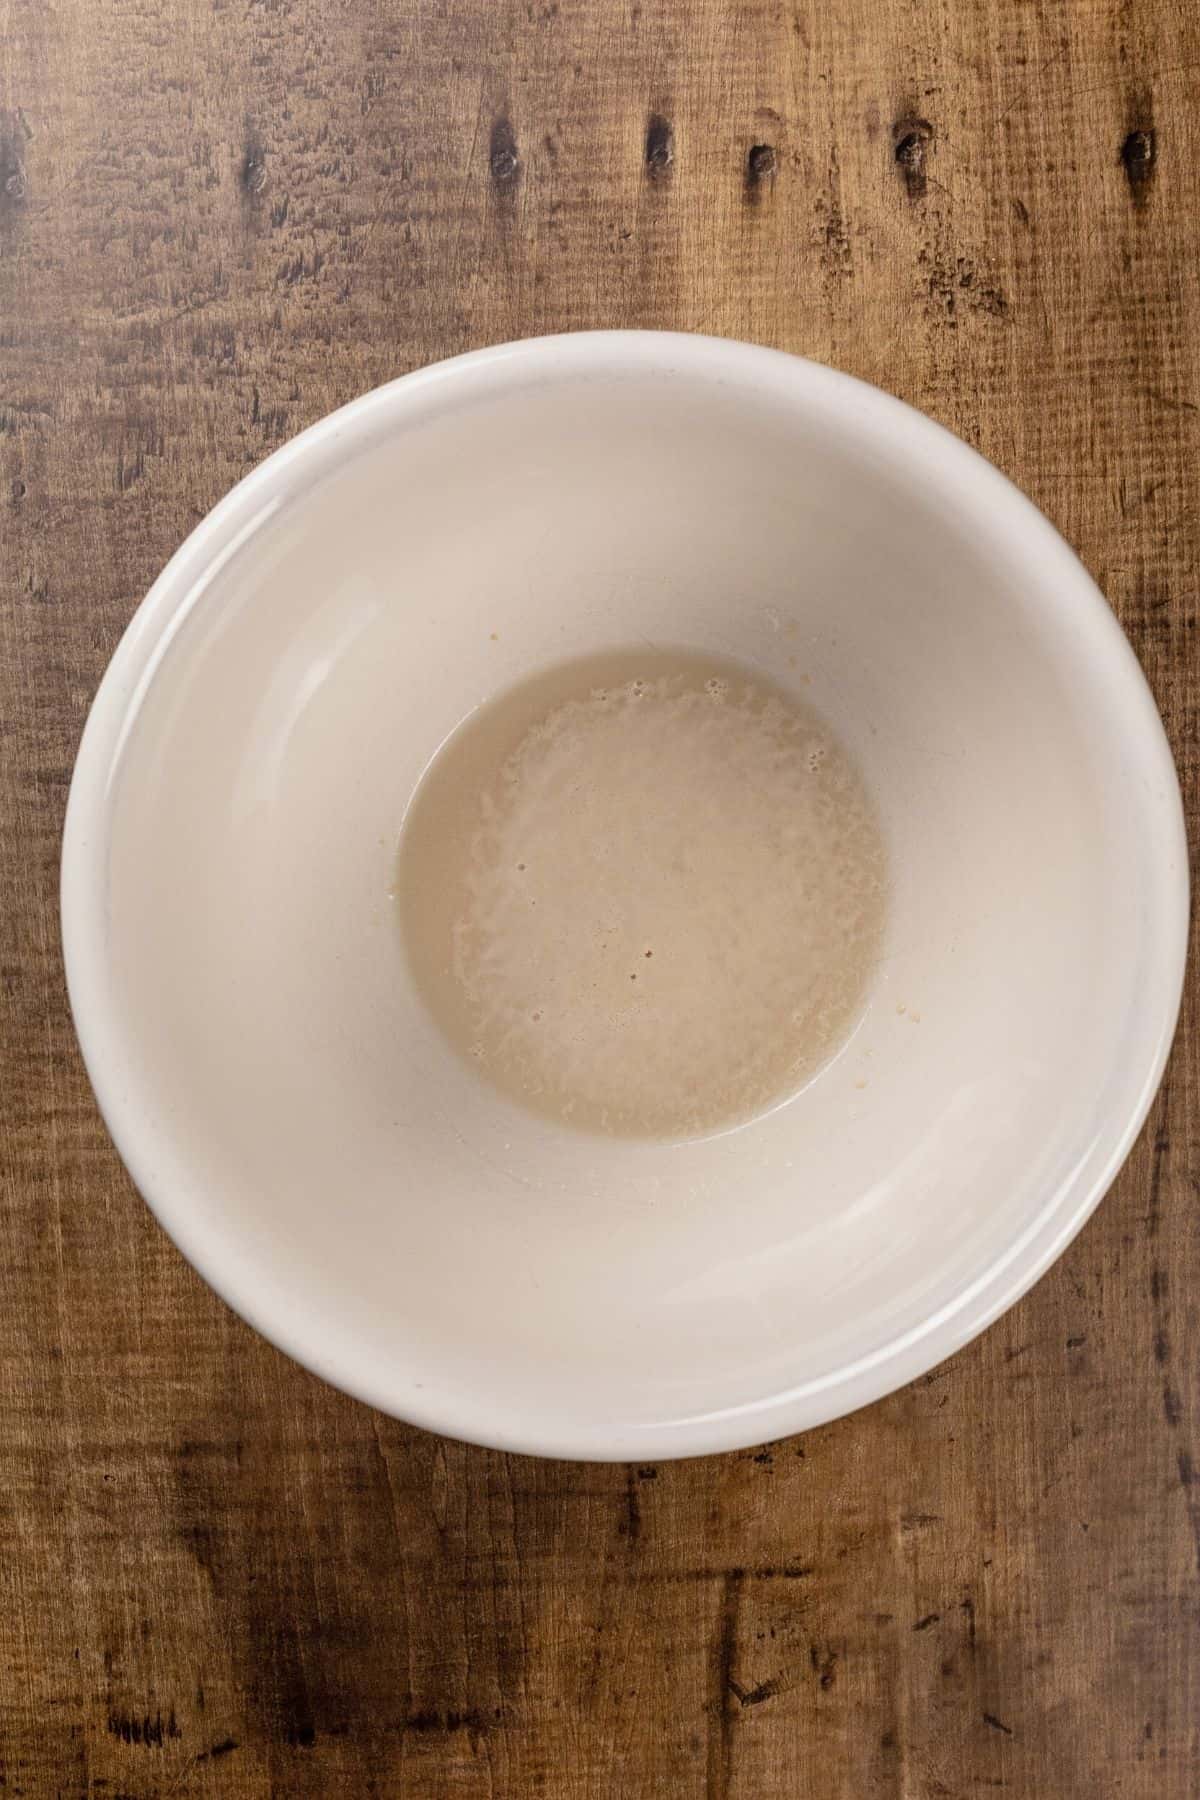 A ceramic bowl is filled with yeast and warm water. It rests on a wood tabletop.